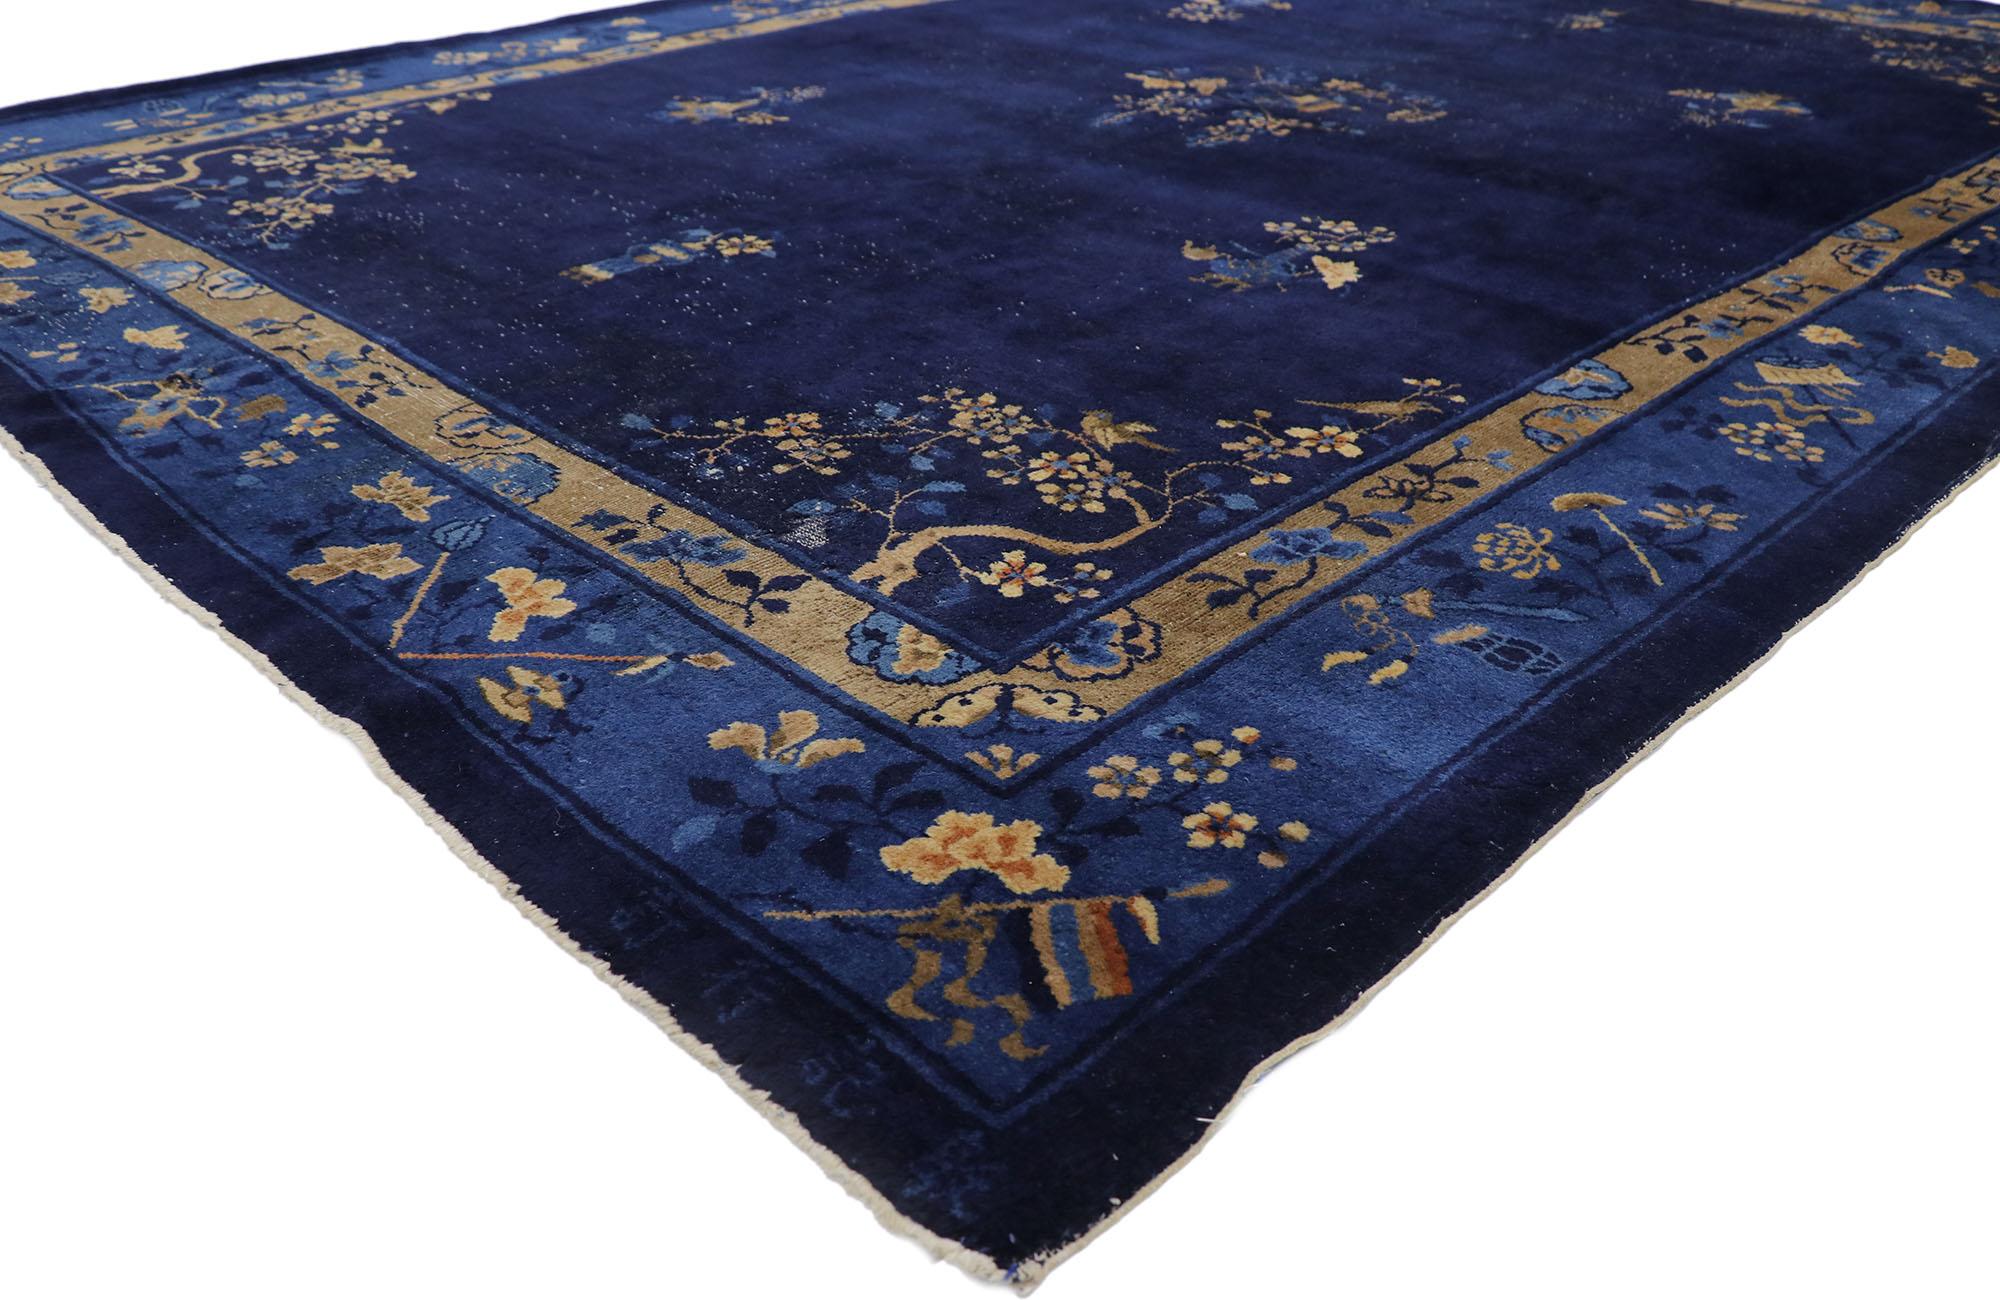 ?78125 Distressed Vintage Chinese Peking rug with Art Deco Style 07'06 x 10'07. ?With Art Deco style, this hand knotted wool distressed vintage Chinese Peking rug features an elegant central open medallion dotted with flowering vases across the